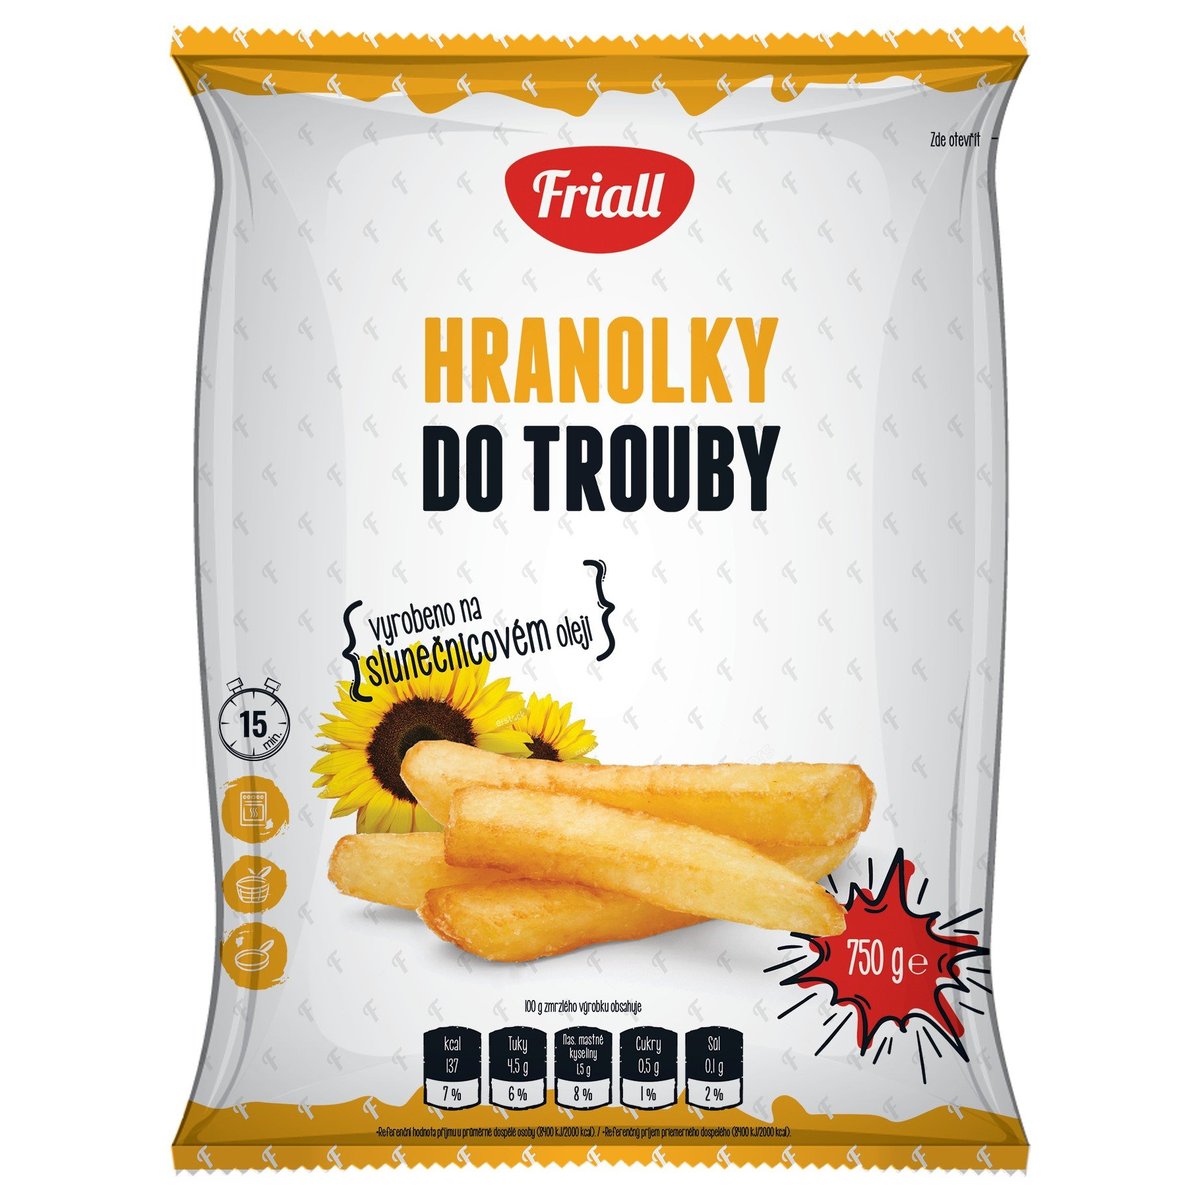 Friall Hranolky do trouby